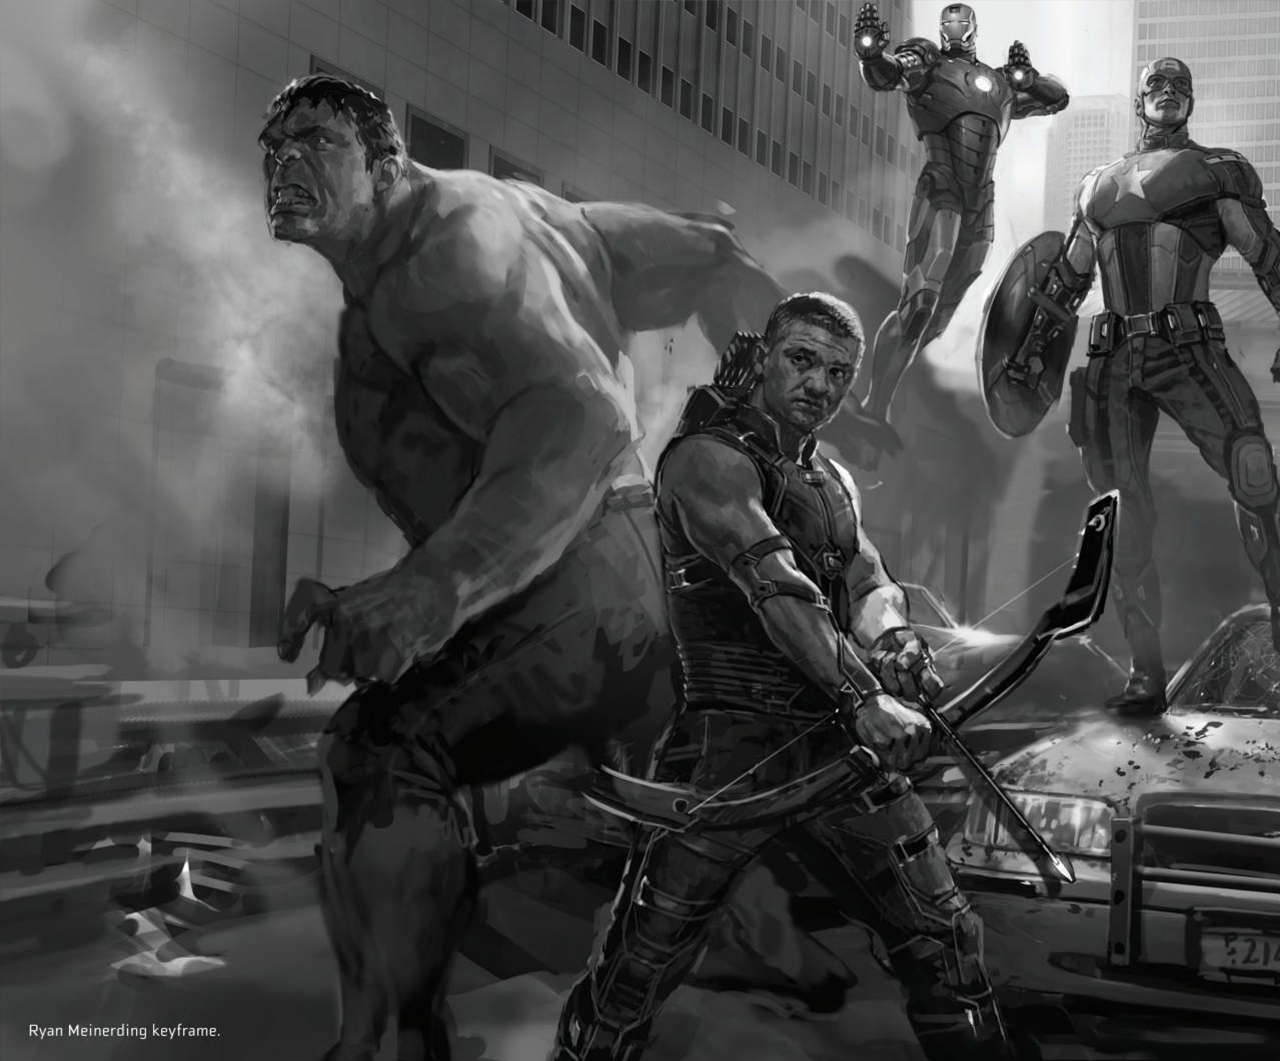 The Road to Marvel's Avengers Age of Ultron - The Art of the Marvel Cinematic Universe 4